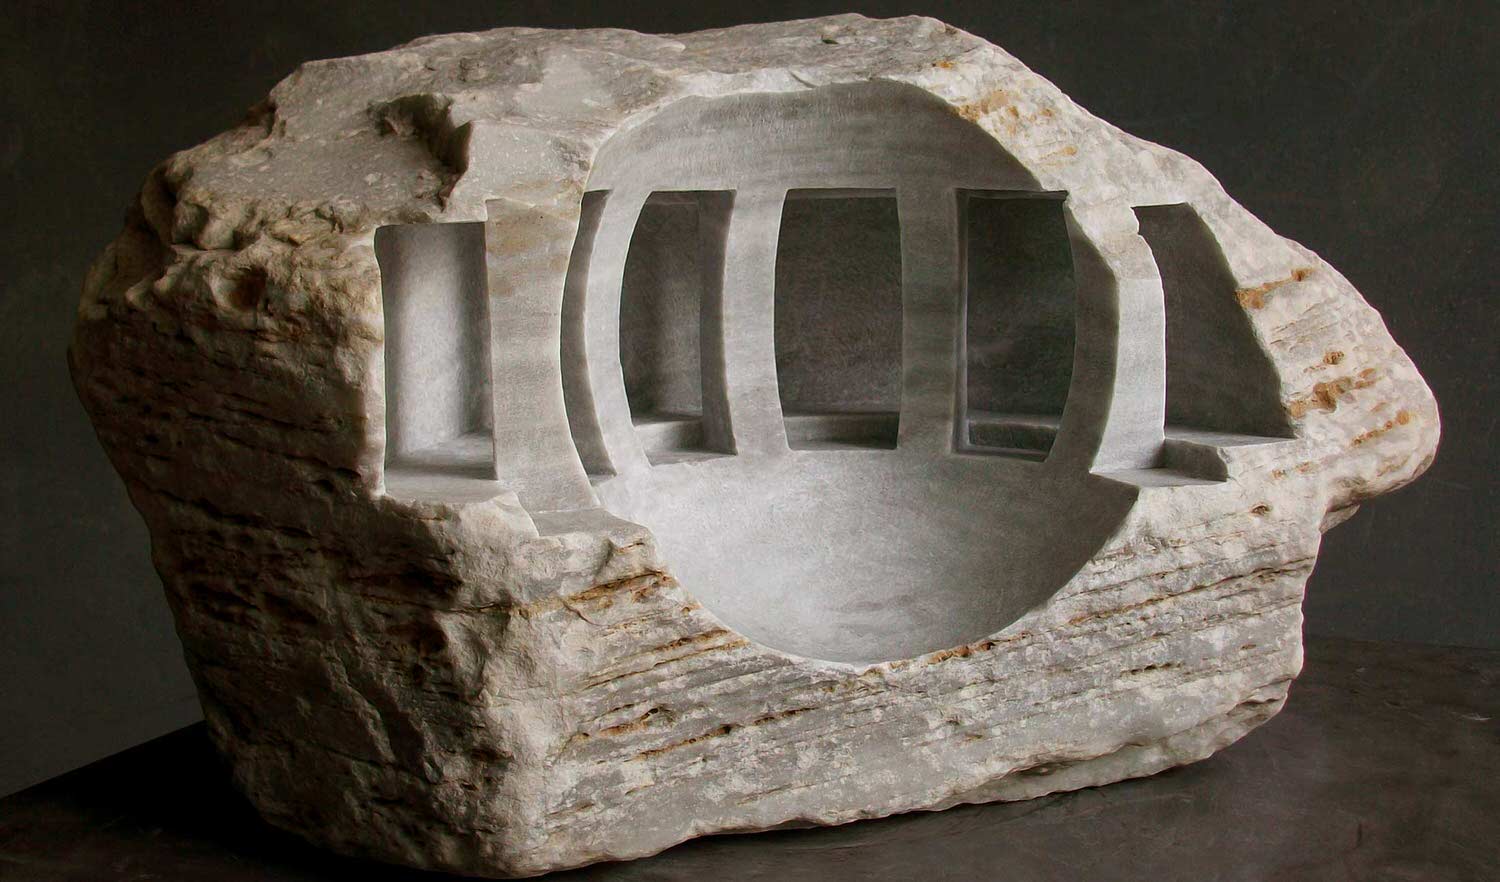 Miniature Marble Sculptures of Medieval Interiors by Matthew Simmonds